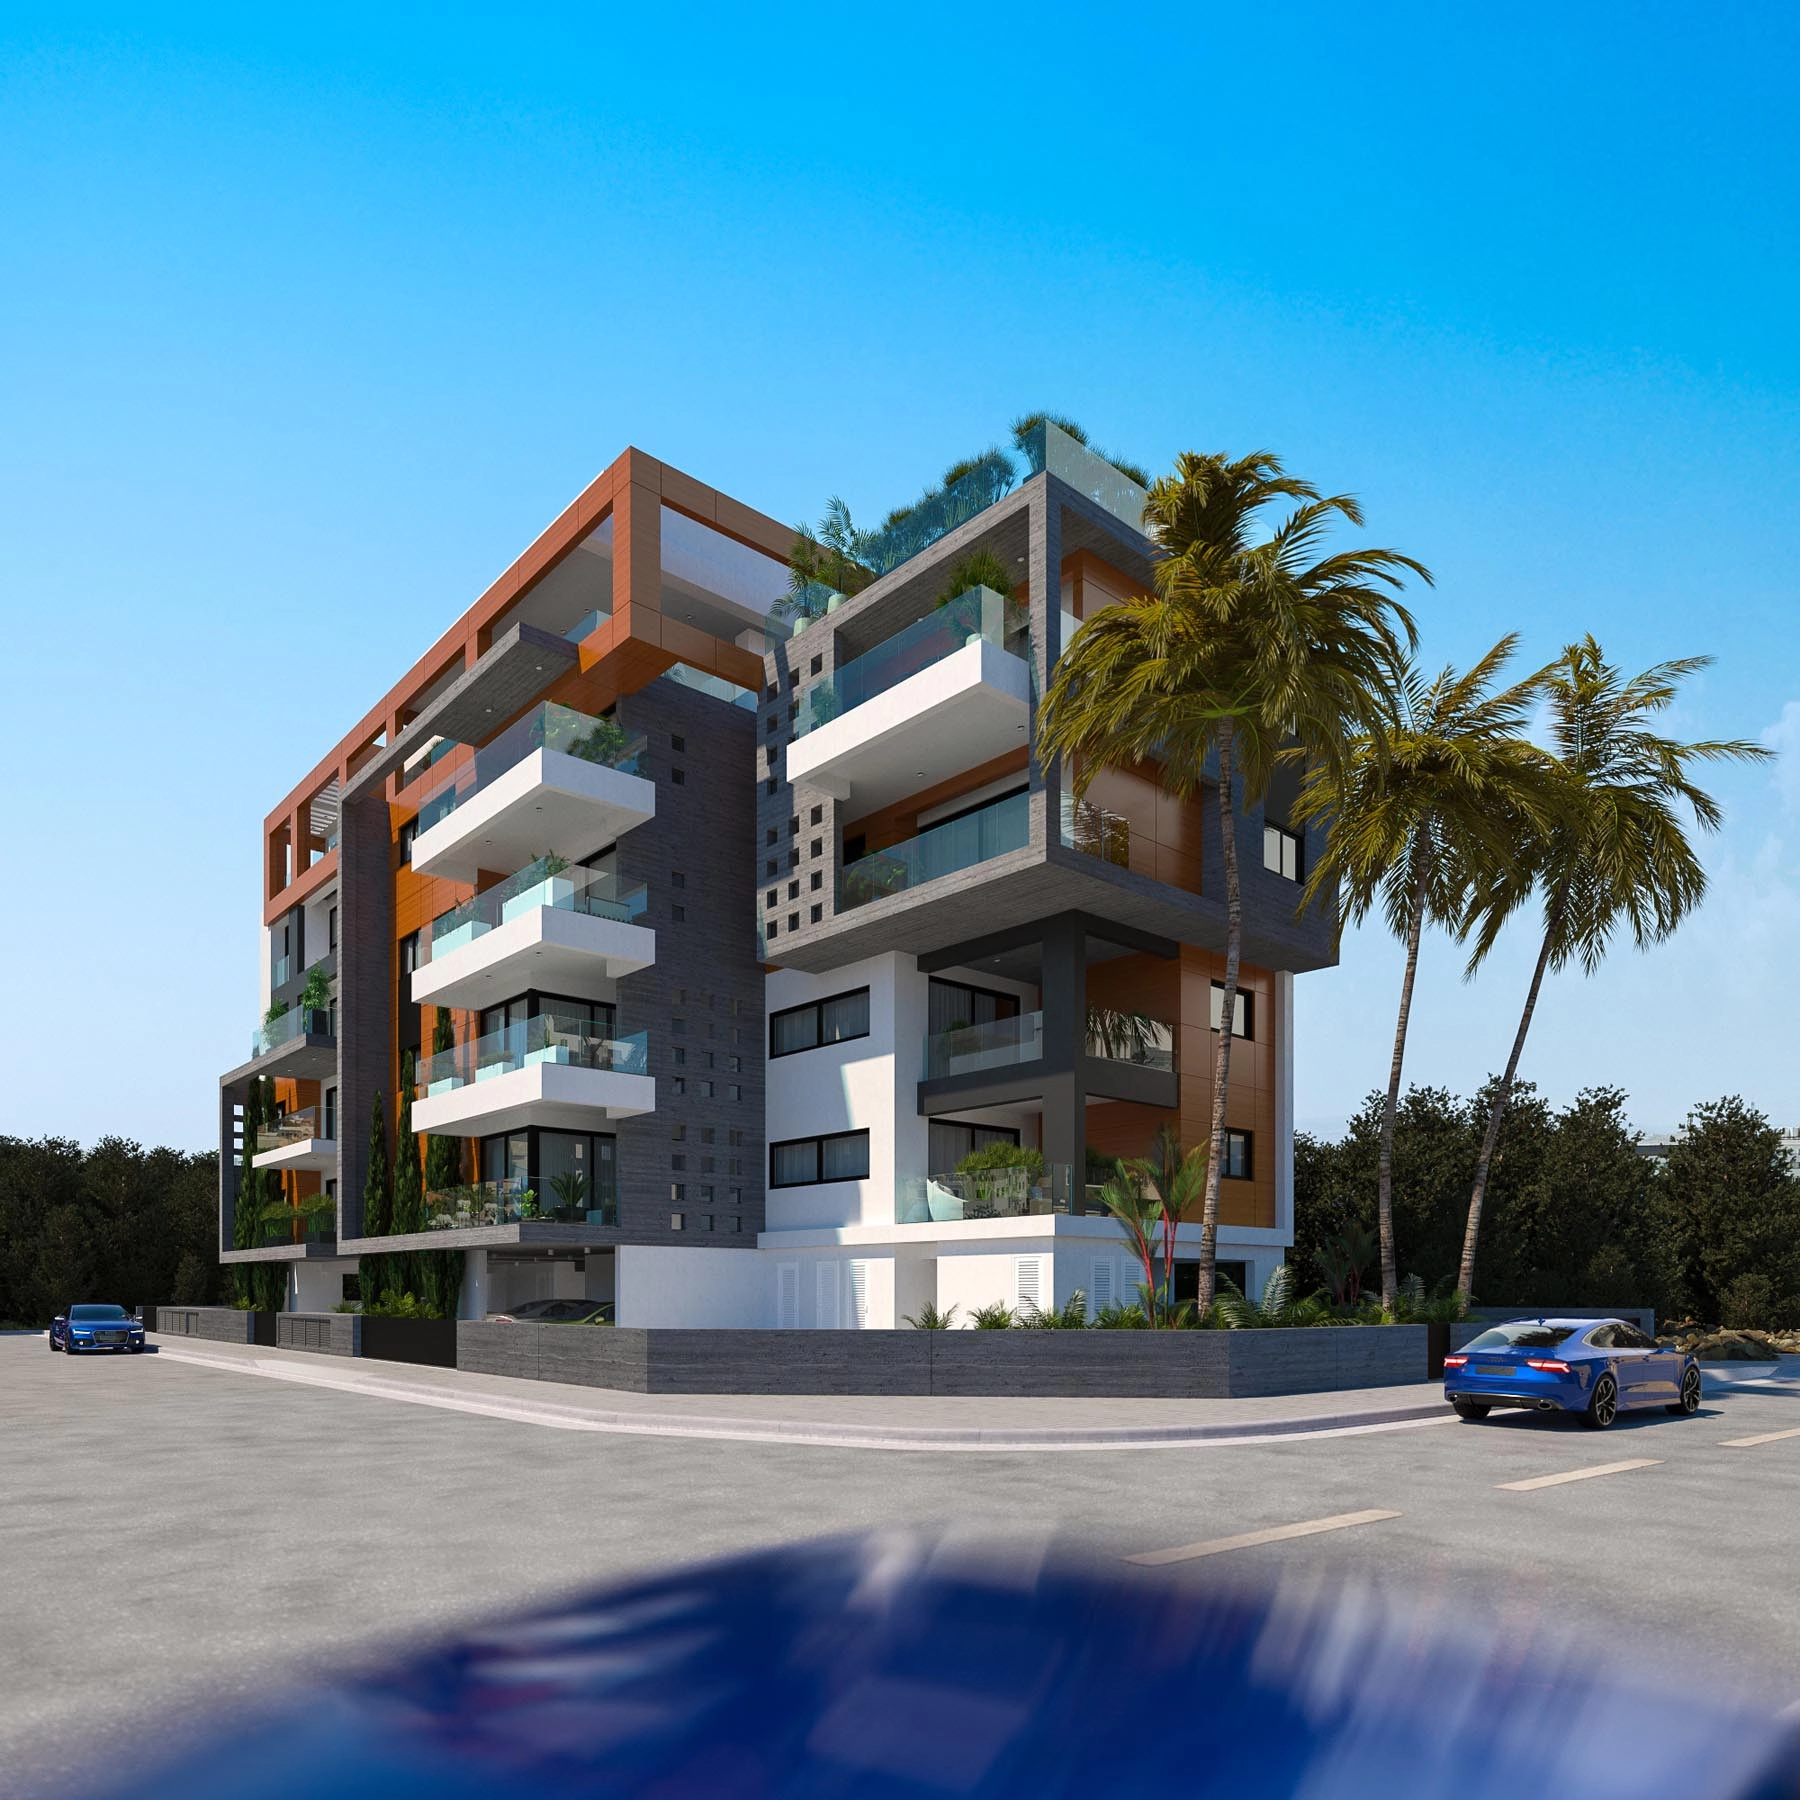 3 Bedroom Apartment for Sale in Limassol – Agios Ioannis